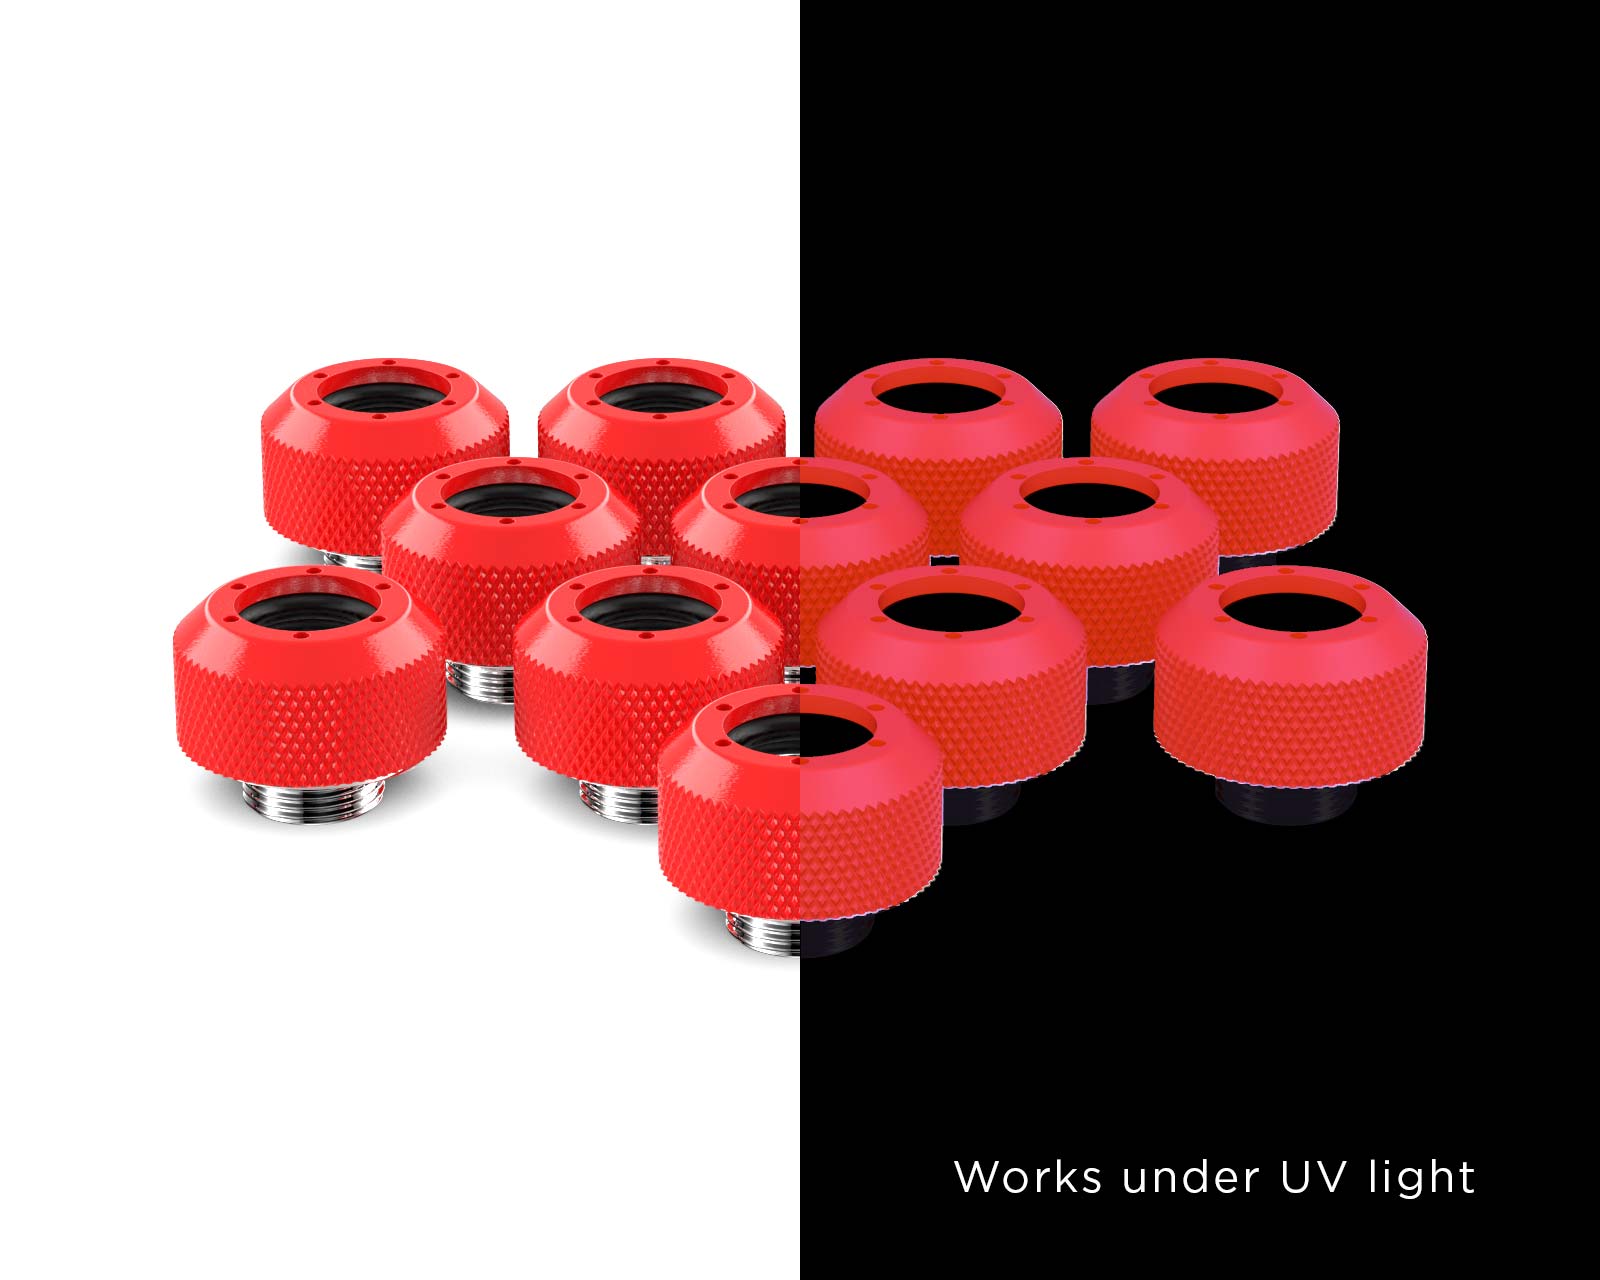 PrimoChill 1/2in. Rigid RevolverSX Series Fitting - 12 pack - PrimoChill - KEEPING IT COOL UV Red